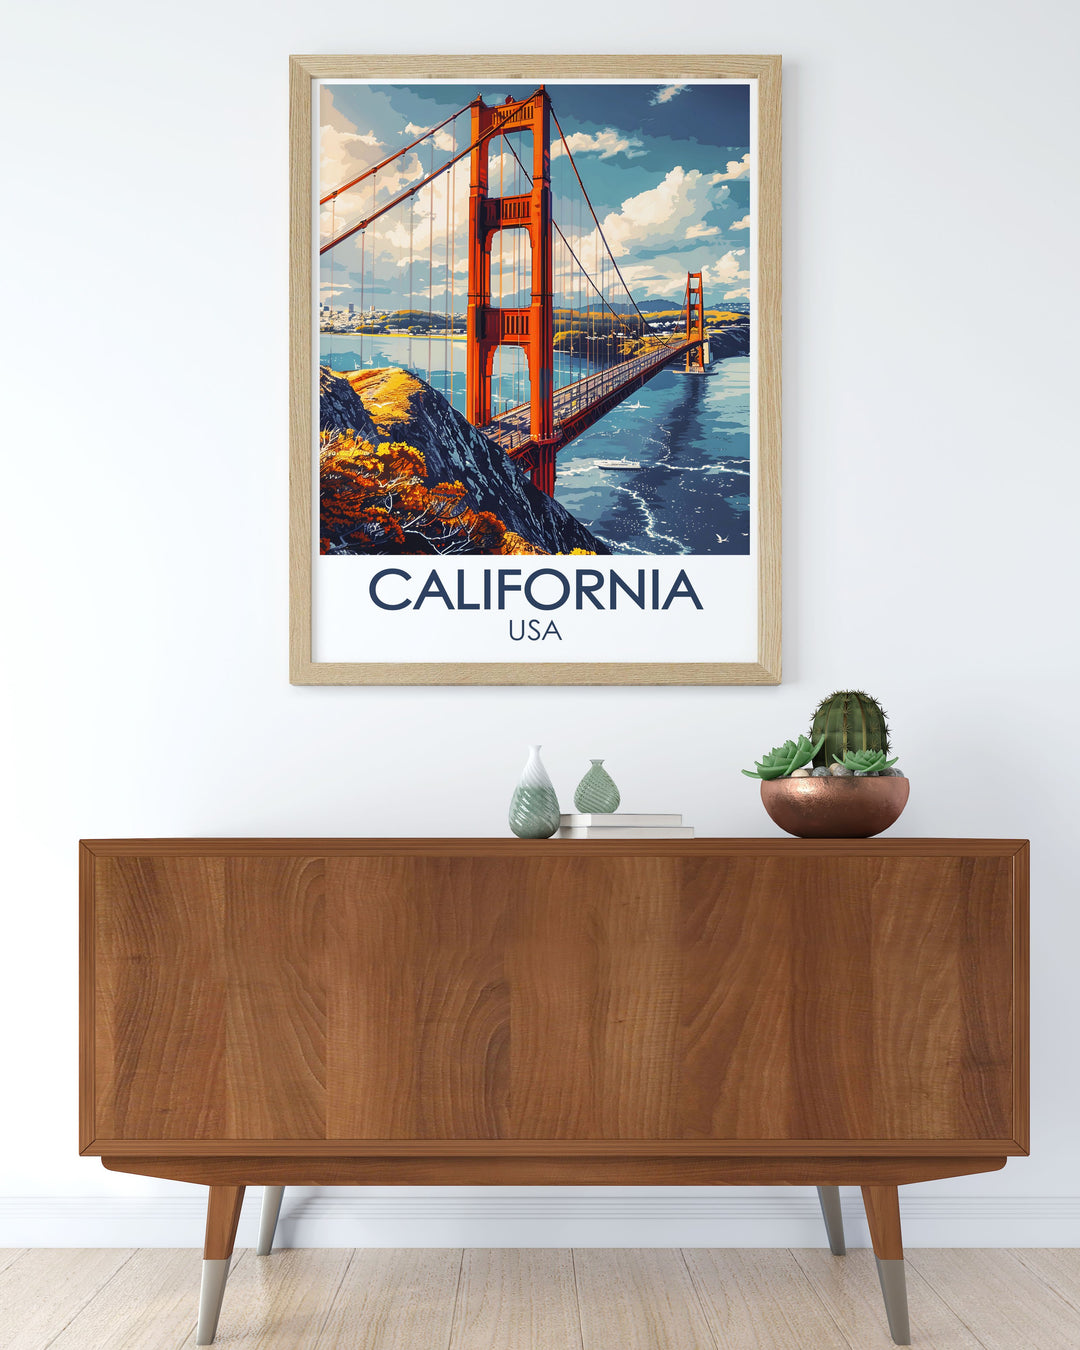 This travel poster captures the iconic Golden Gate Bridge in California, showcasing its majestic structure and vibrant International Orange color against the scenic backdrop of San Francisco Bay. Perfect for adding a touch of architectural beauty to your home decor.